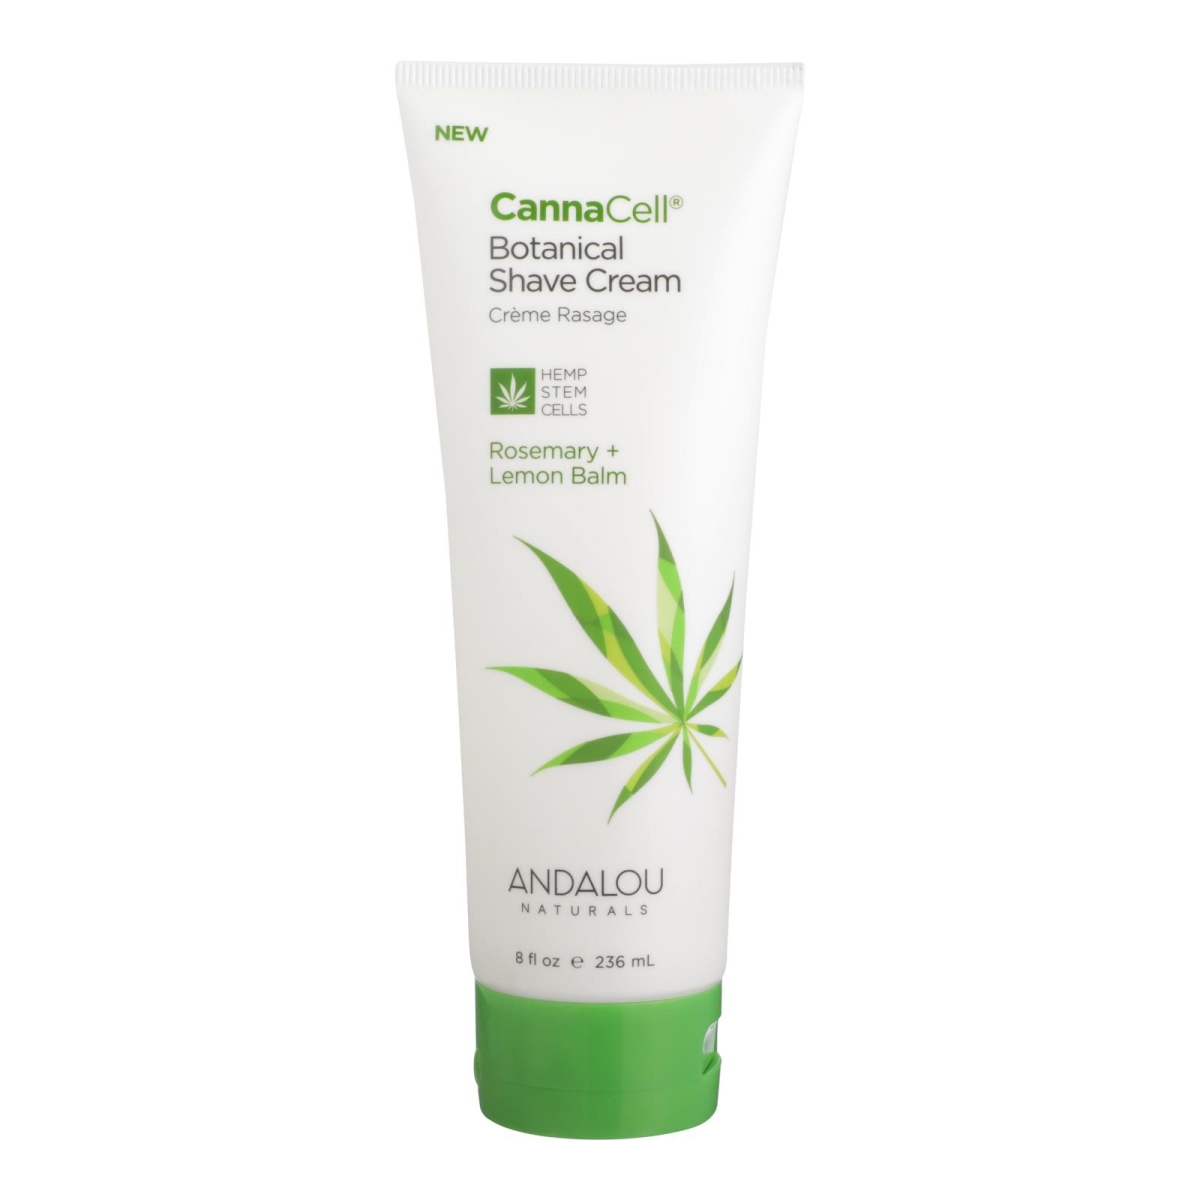 Picture of Andalou Naturals HG2444578 8 fl oz Shave Cream Cannacell - Rosemary & Lemom Balm